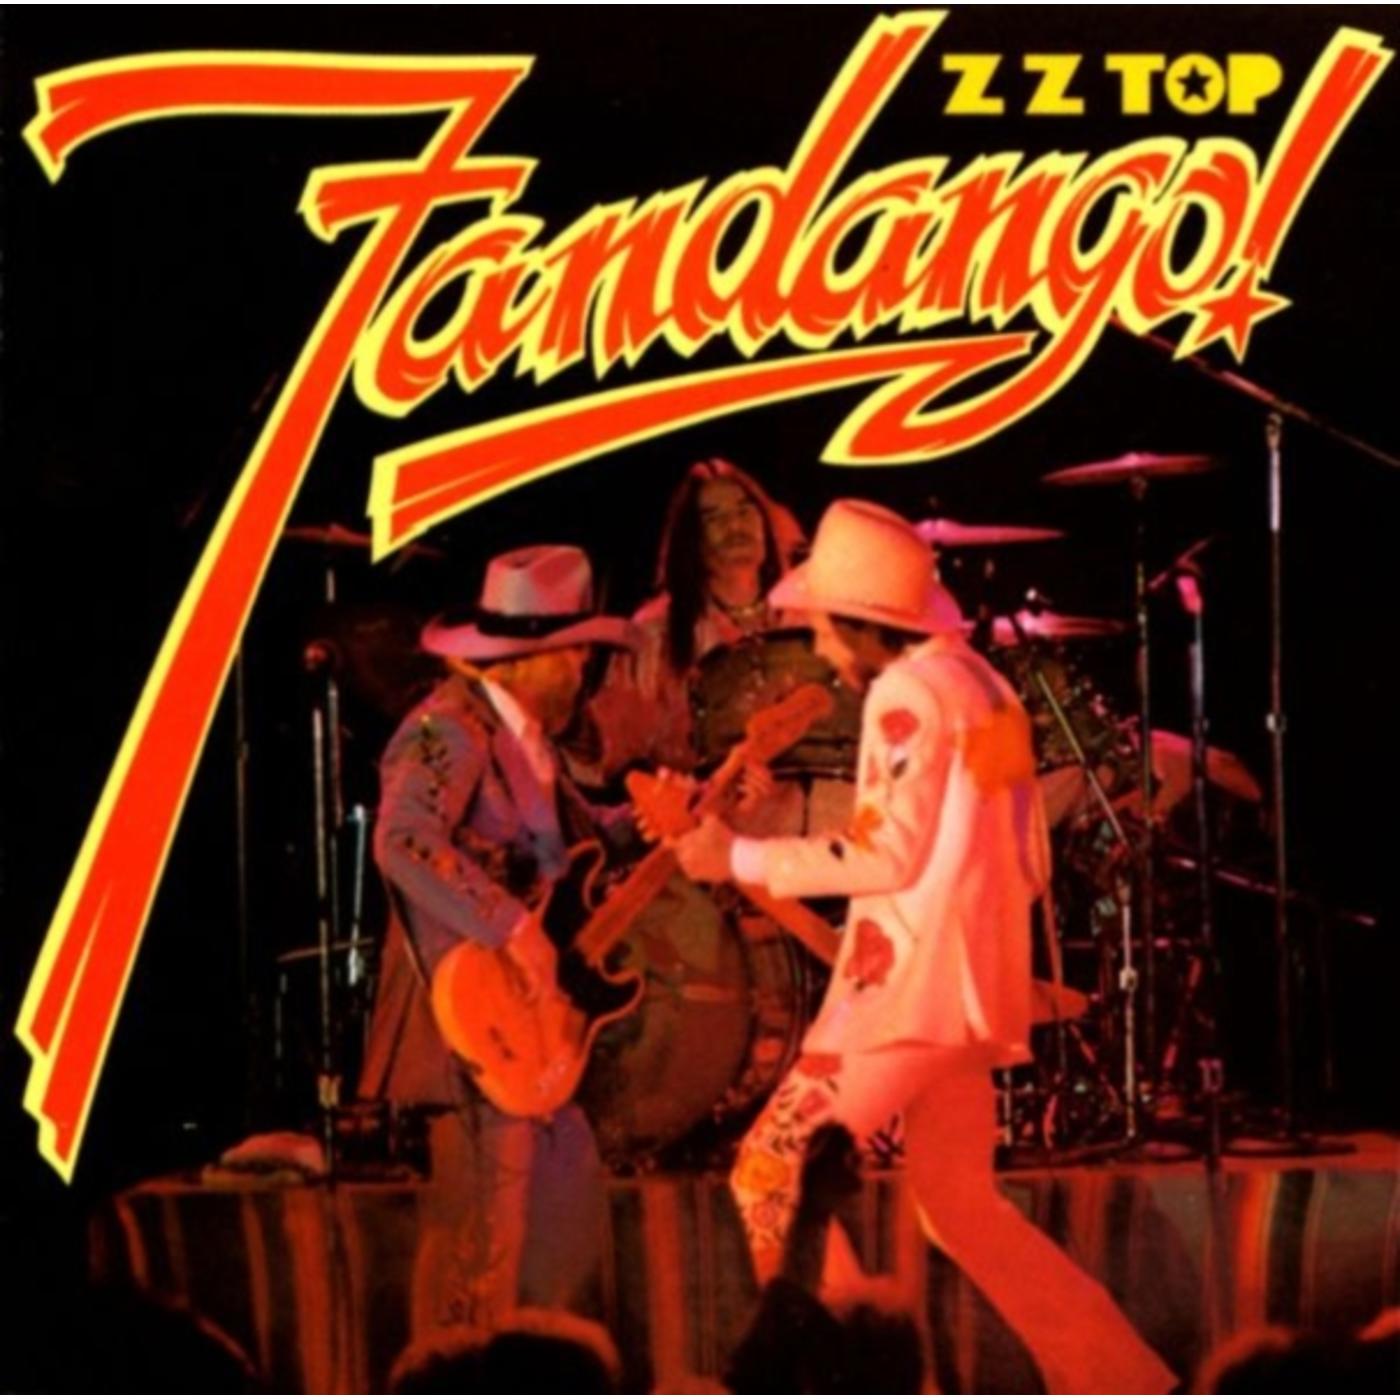 ZZ Top Fandango [Expanded & Remastered]